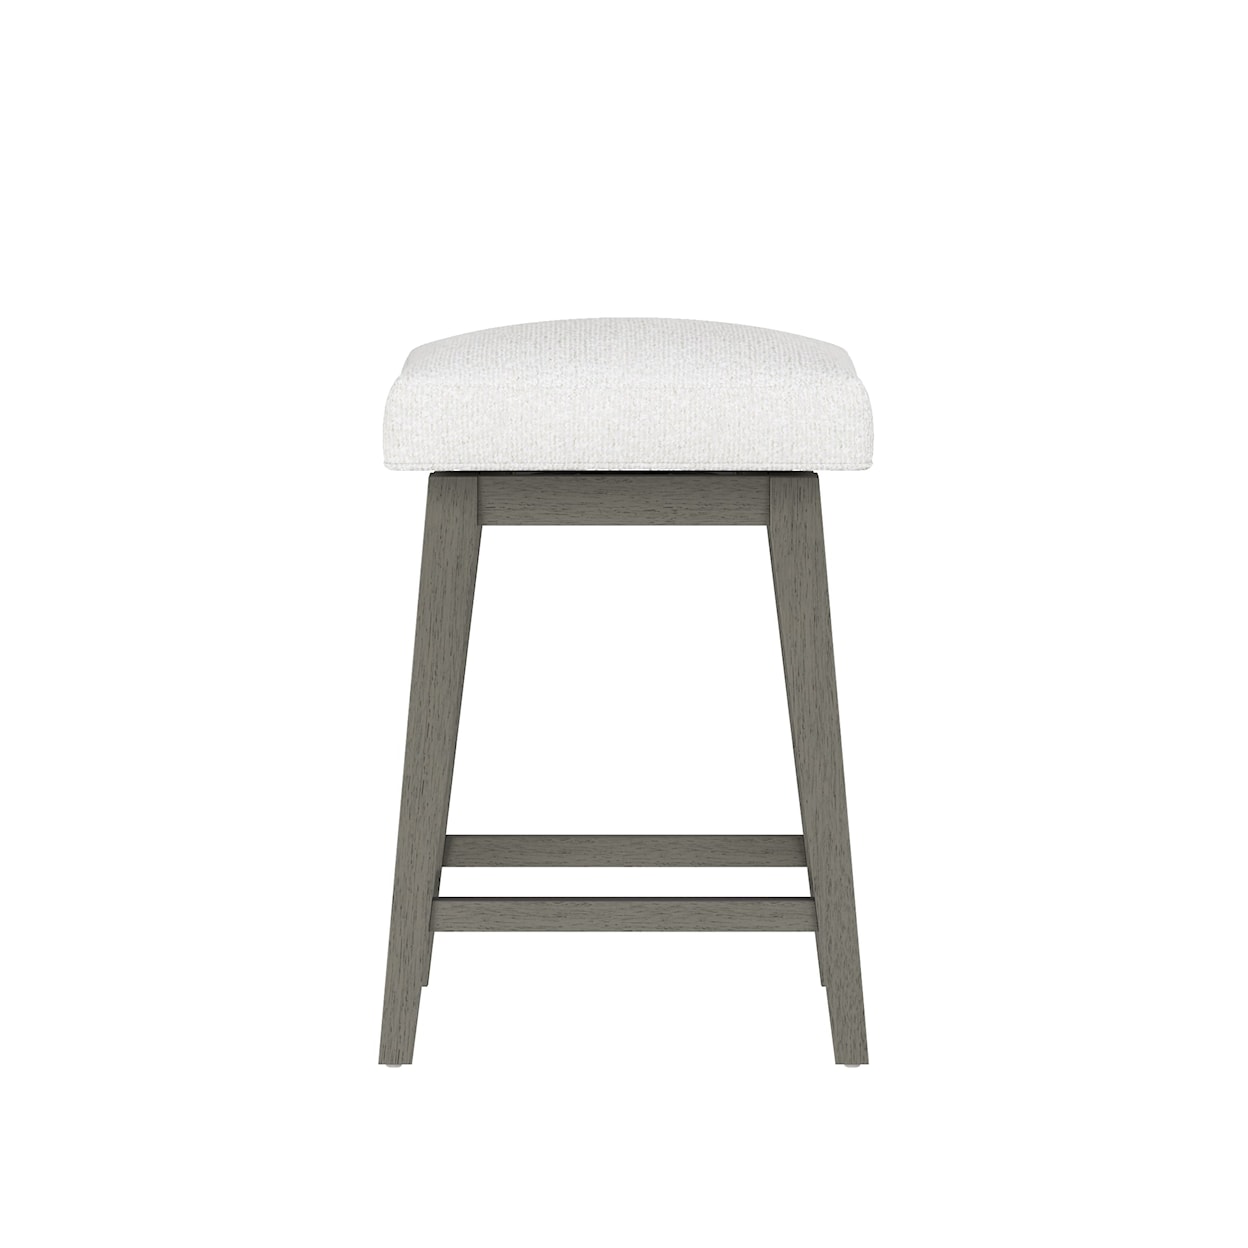 Hillsdale Uniquely Yours Square Backless Adjustable Swivel Stool